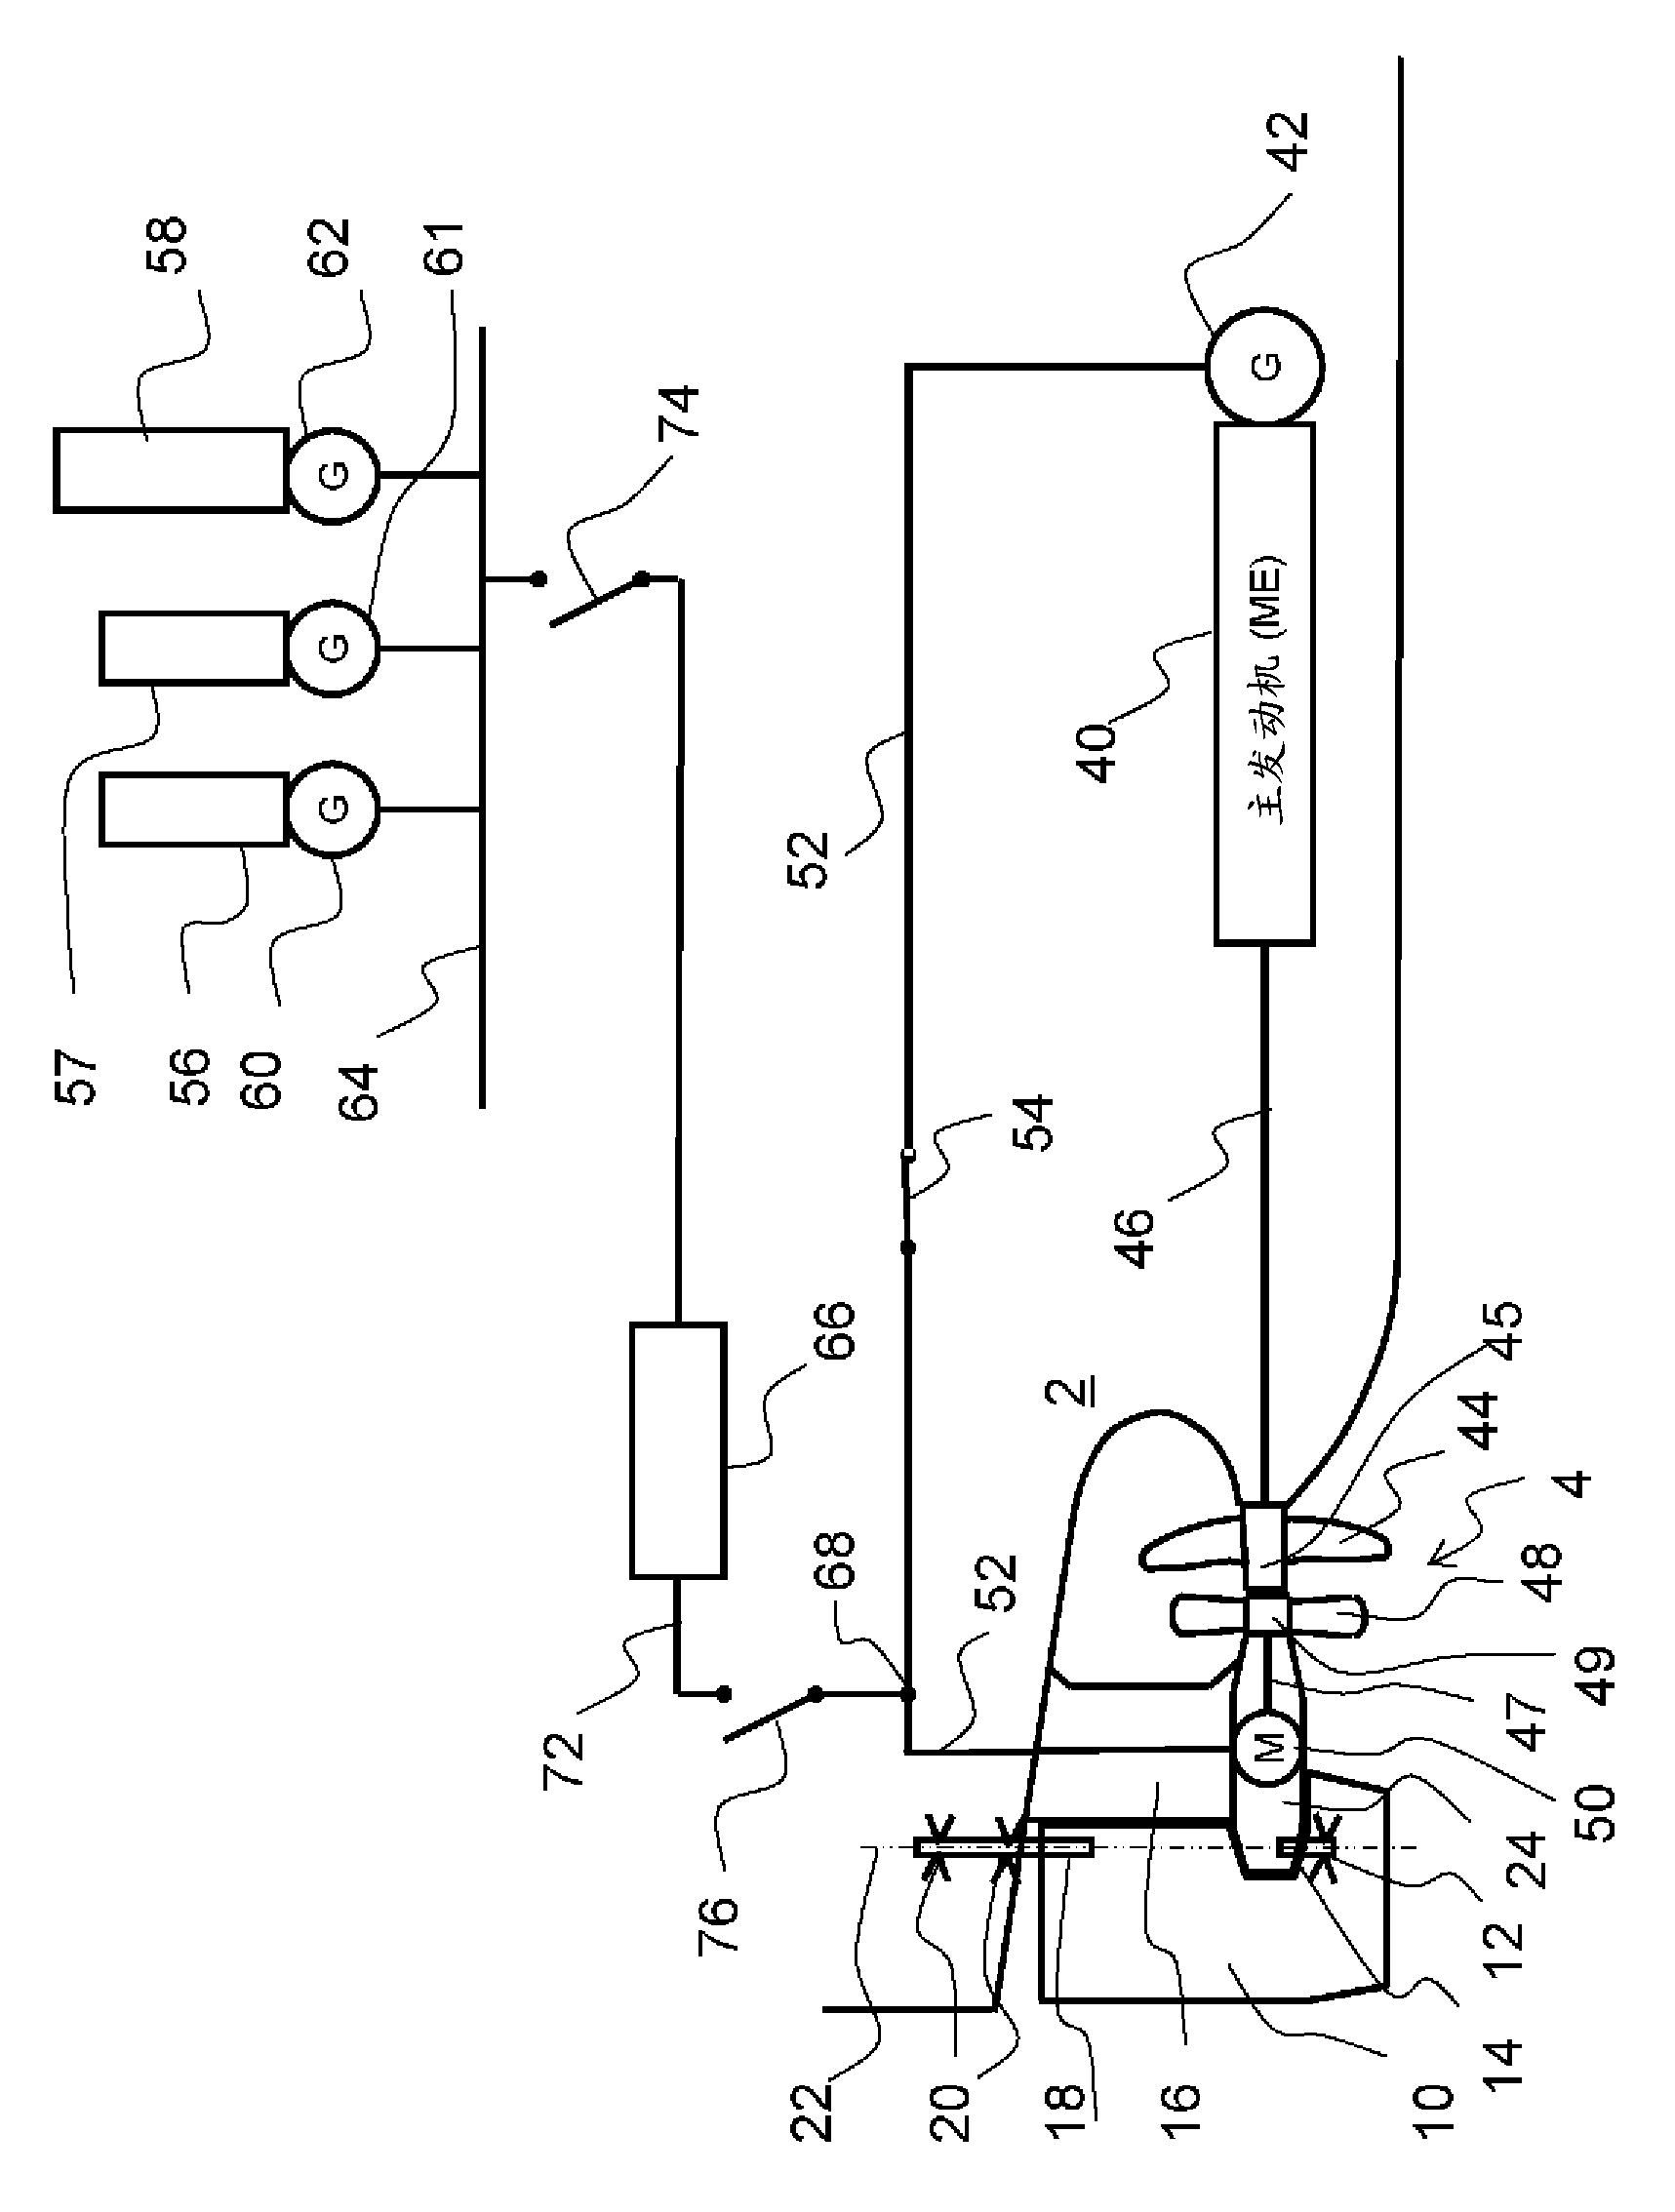 Arrangement for steering a ship and for supplying power to its propulsion system